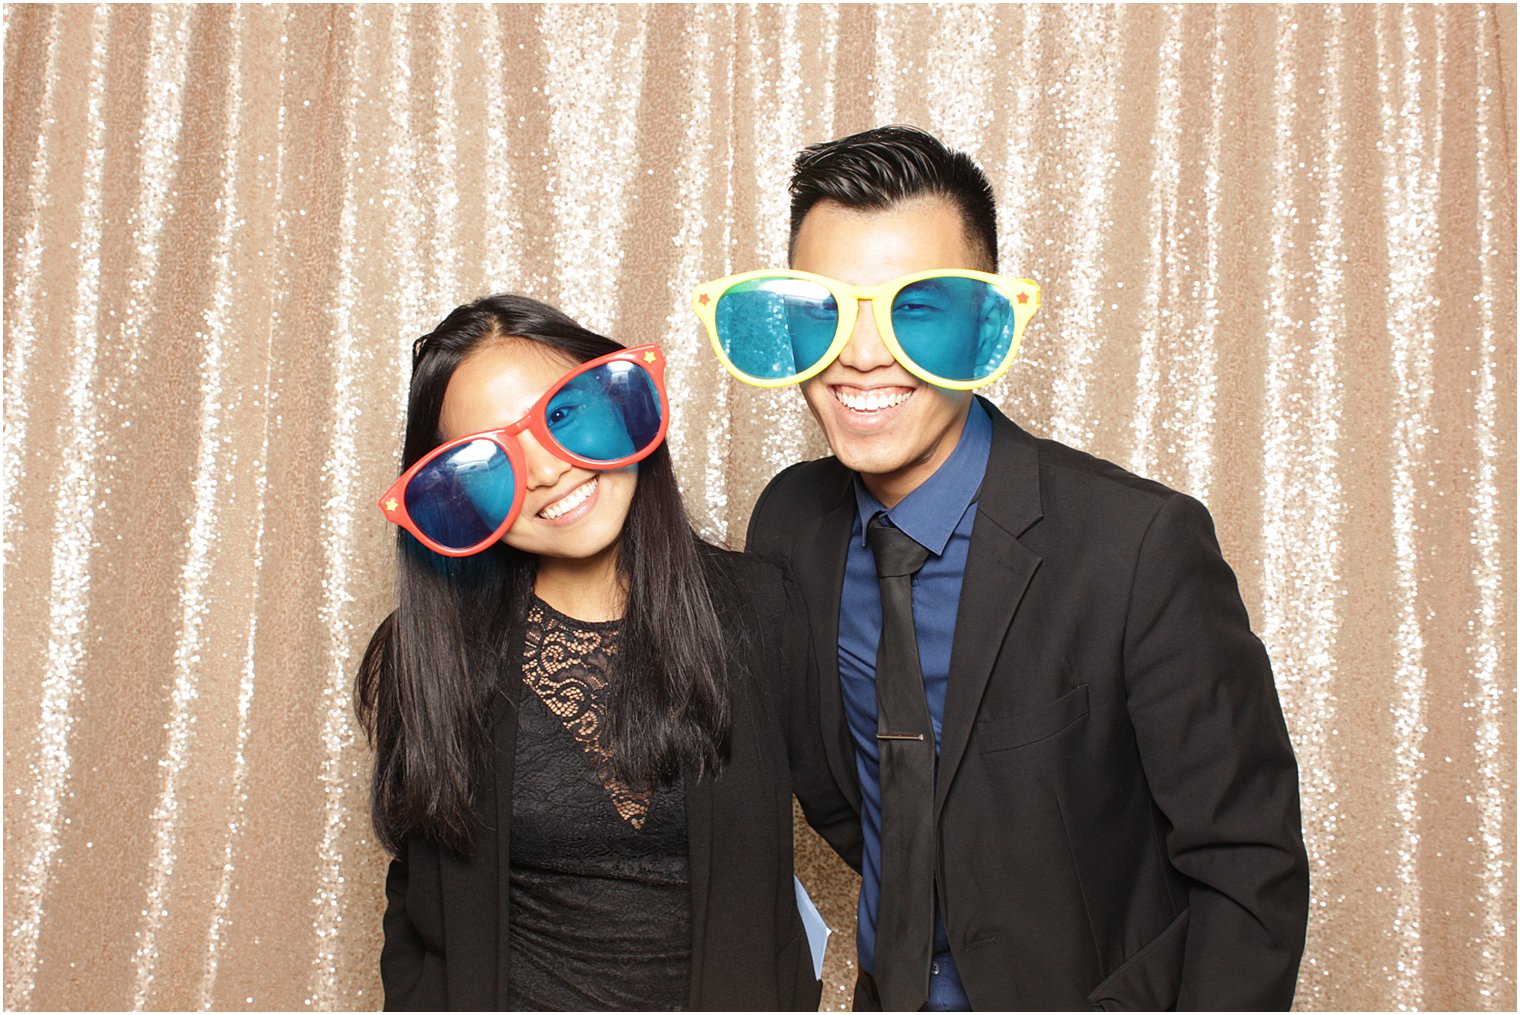 wedding guests pose in sunglasses during NJ wedding reception